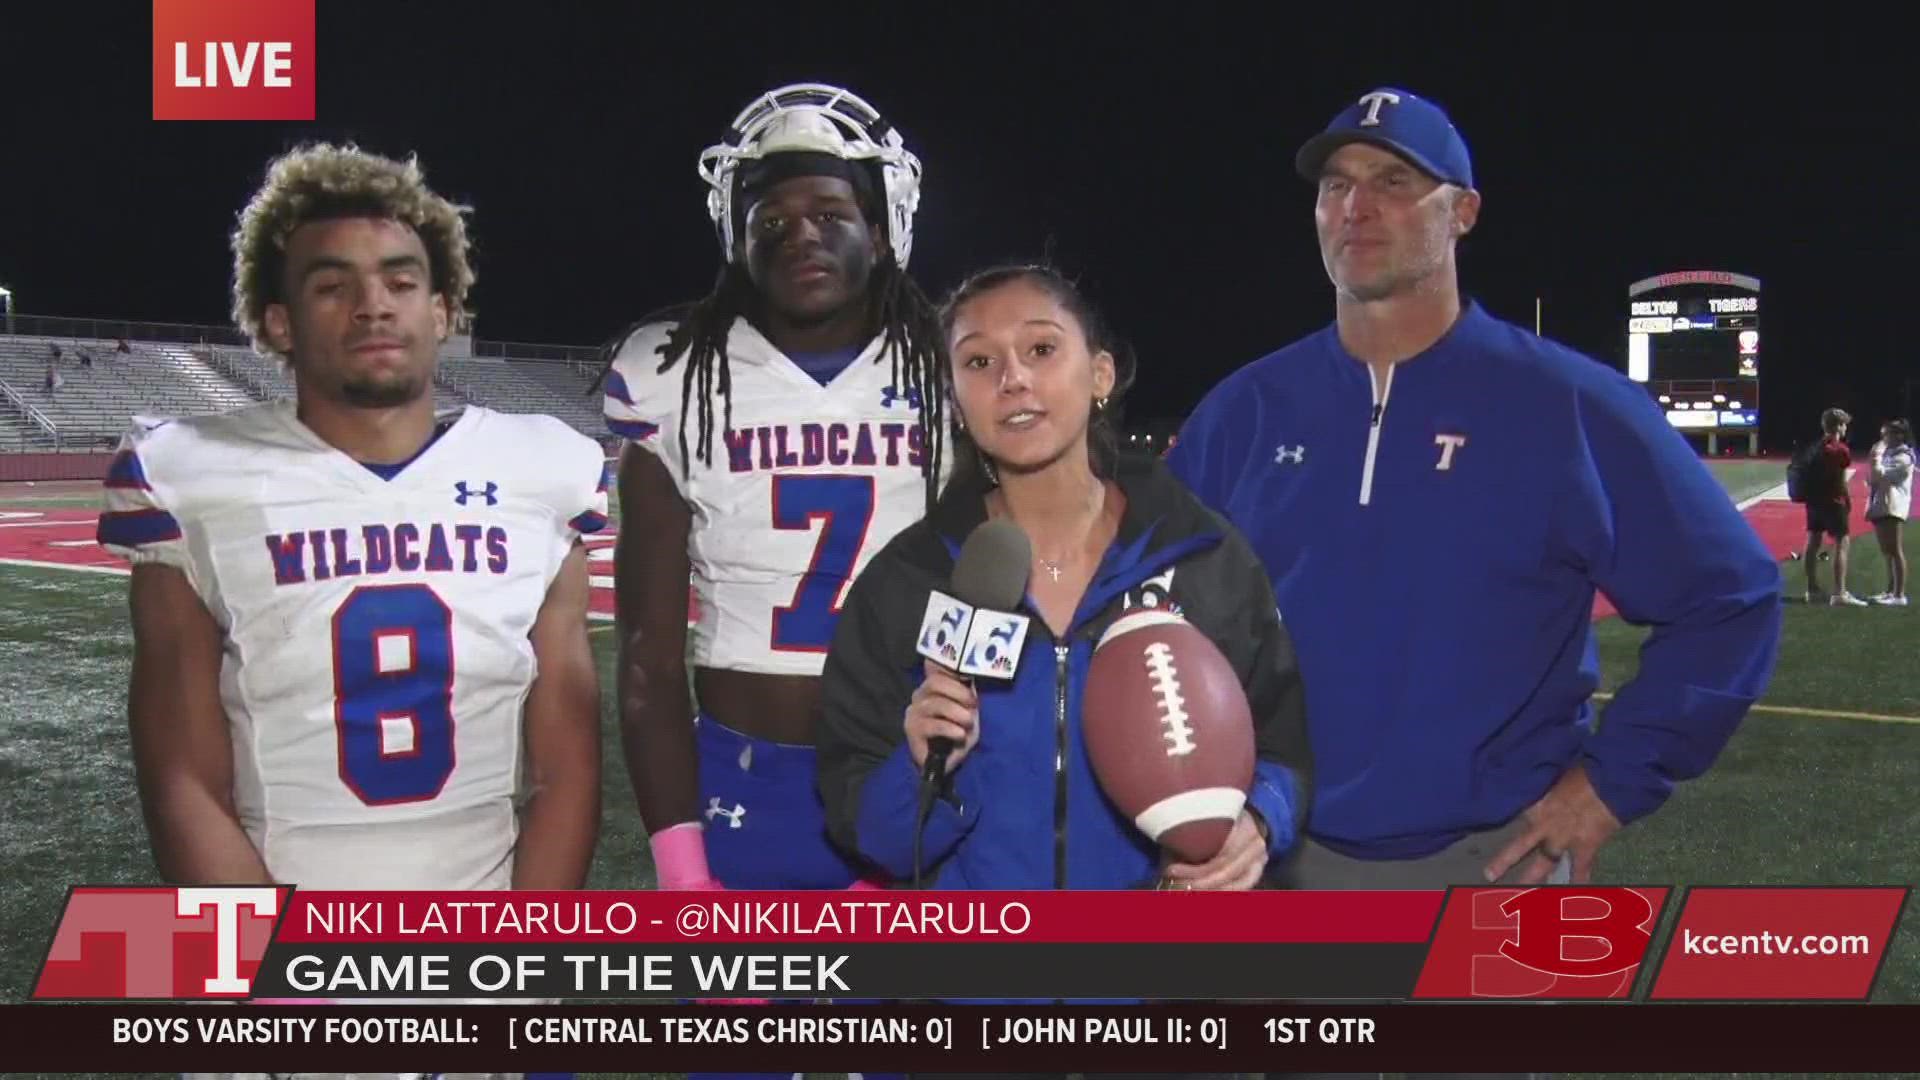 The Wildcats are our Week 8 GOTW champs after beating the Tigers, 50-15.